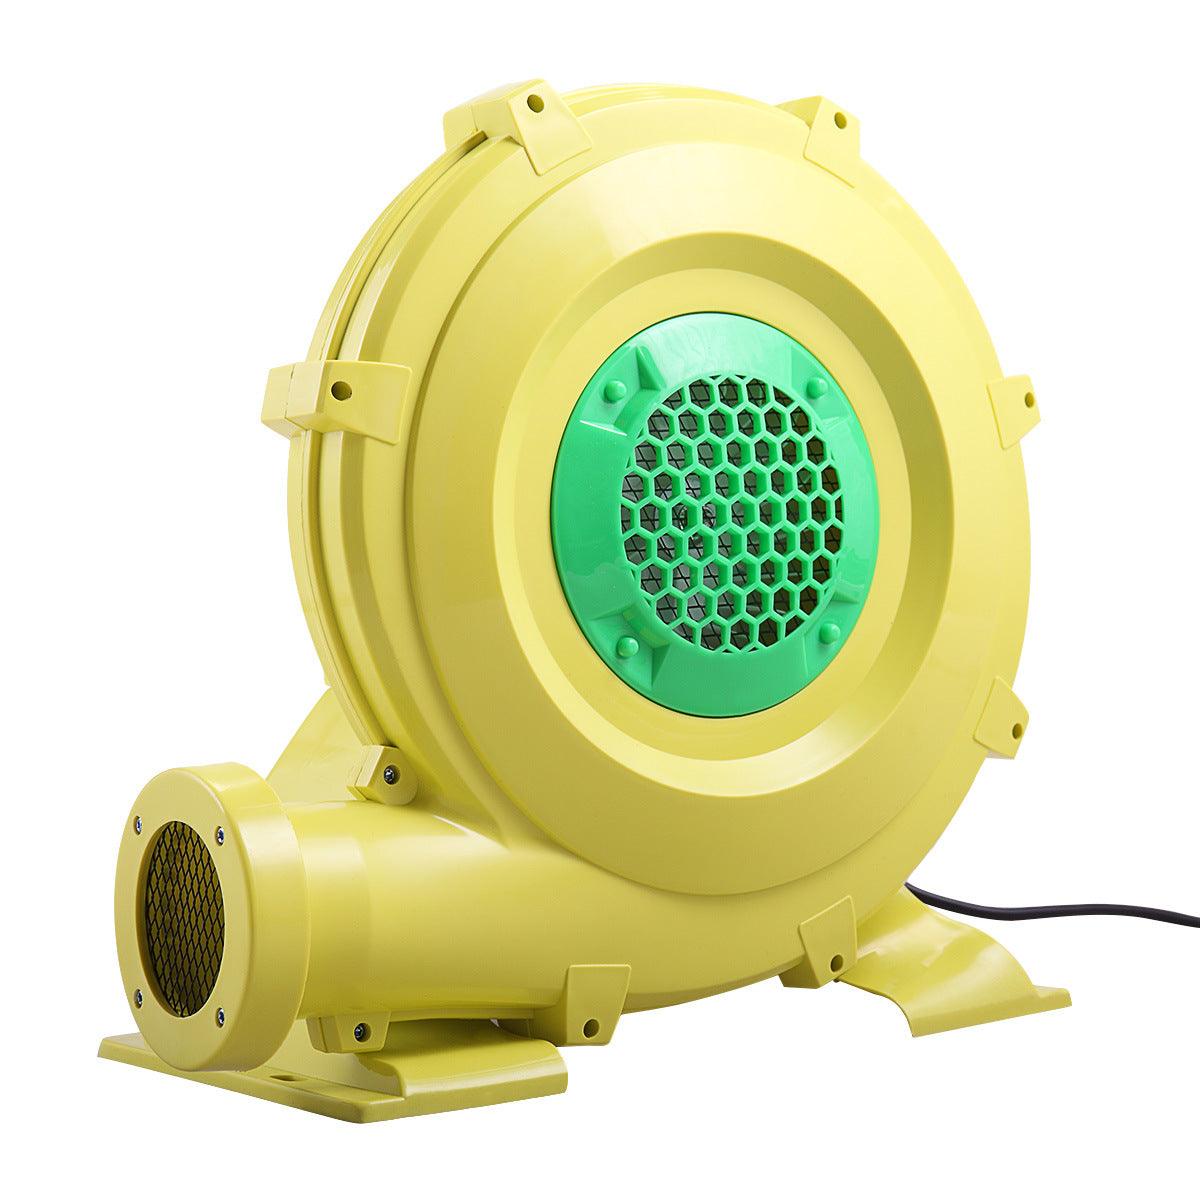 LazyPro Outdoor Indoor Air Blower, Pump Fan for Inflatable Bounce Castle, Water Slides, Safe, Portable - Yellow and Green XH - Lazy Pro